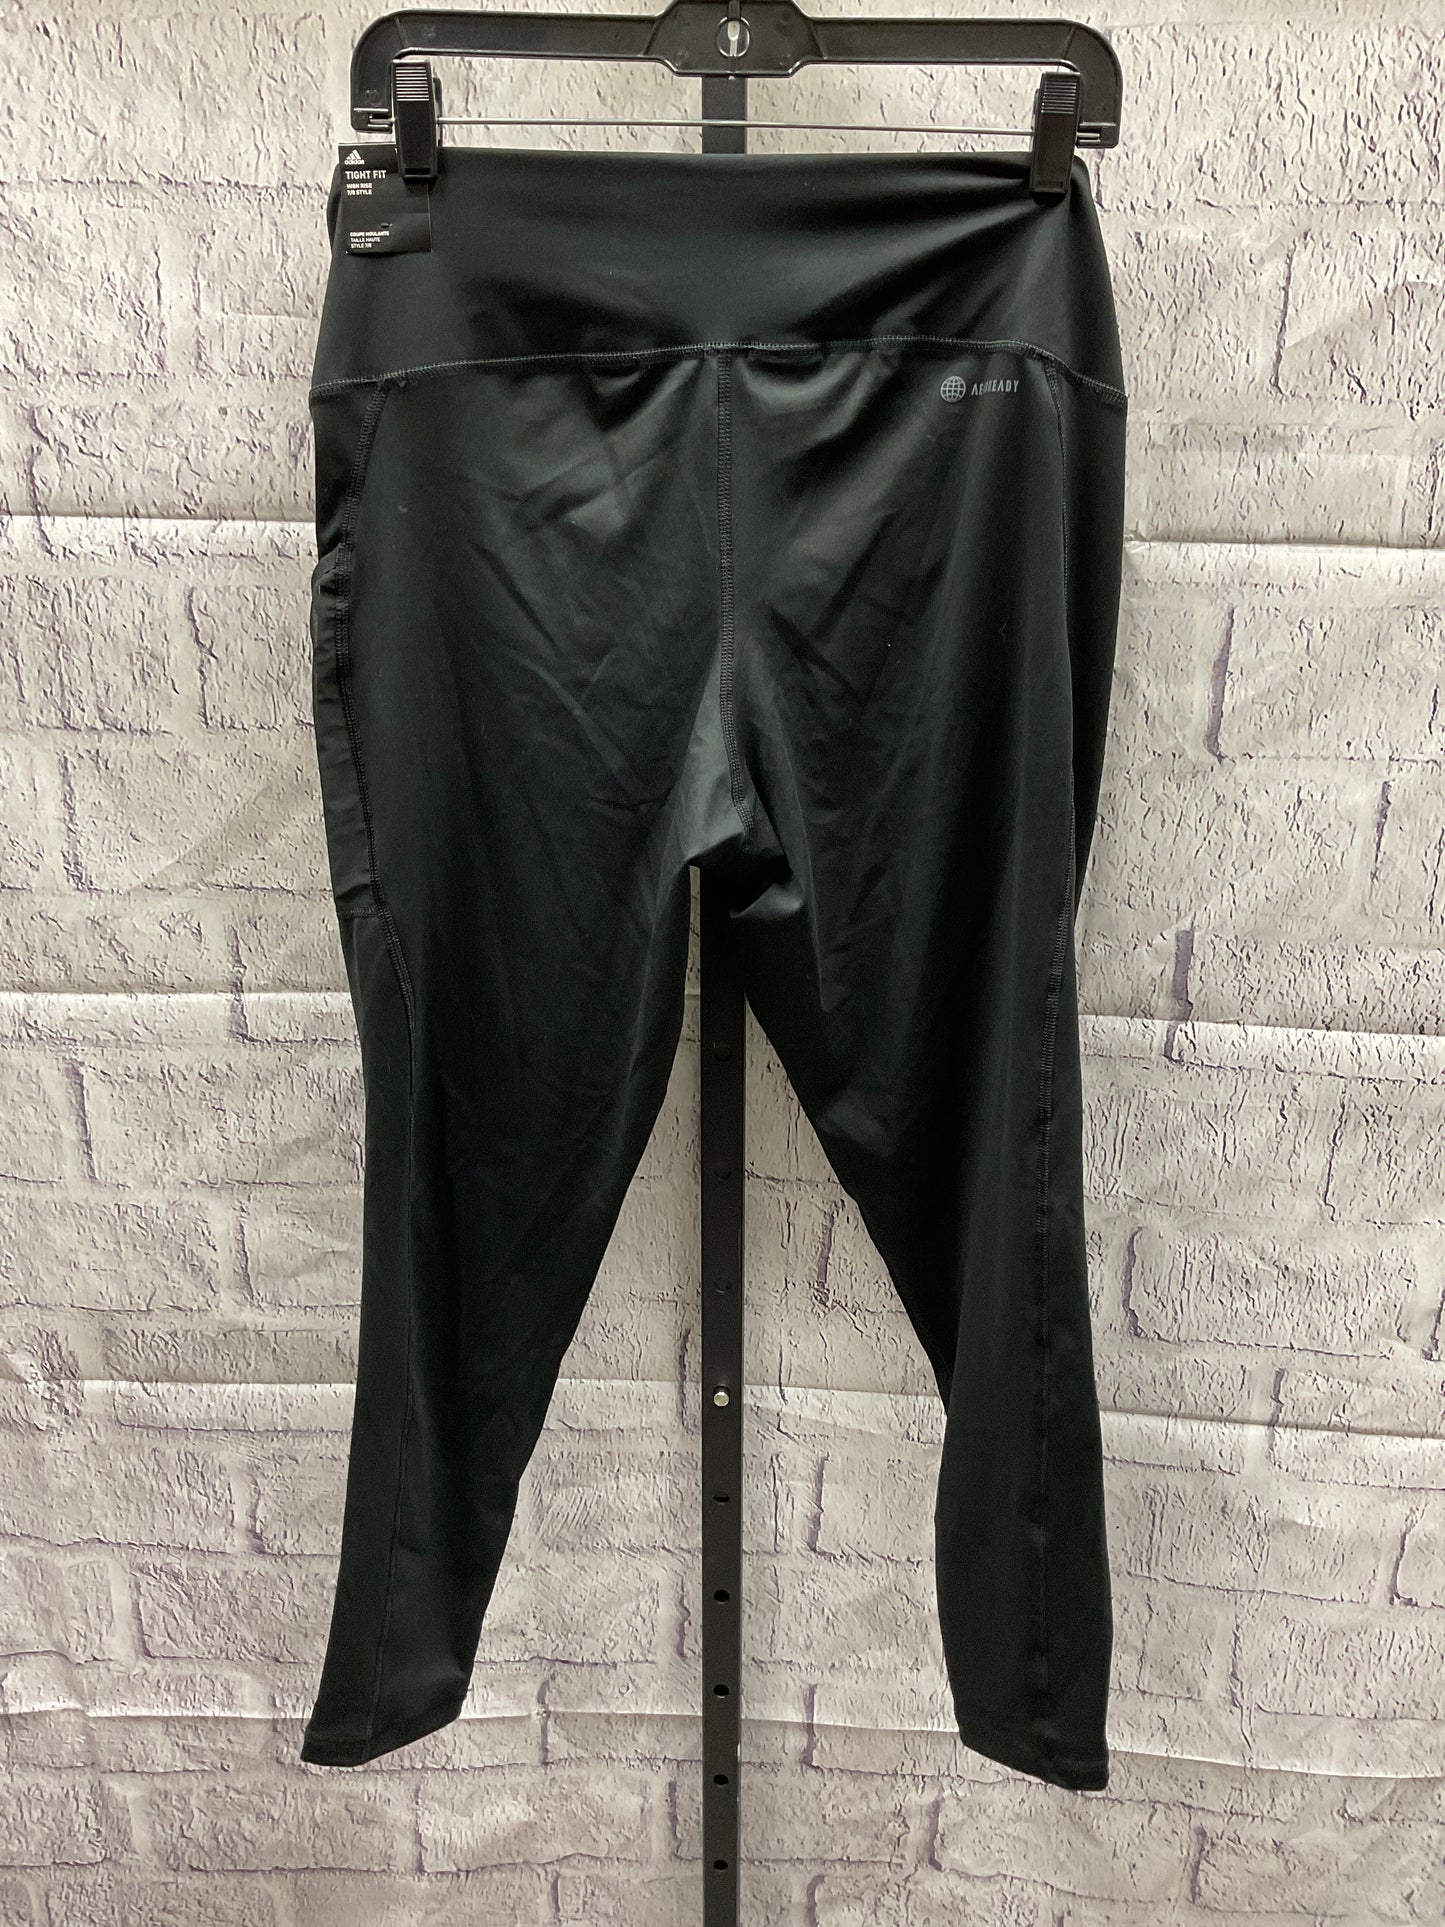 Athletic Leggings By Adidas  Size: 1x